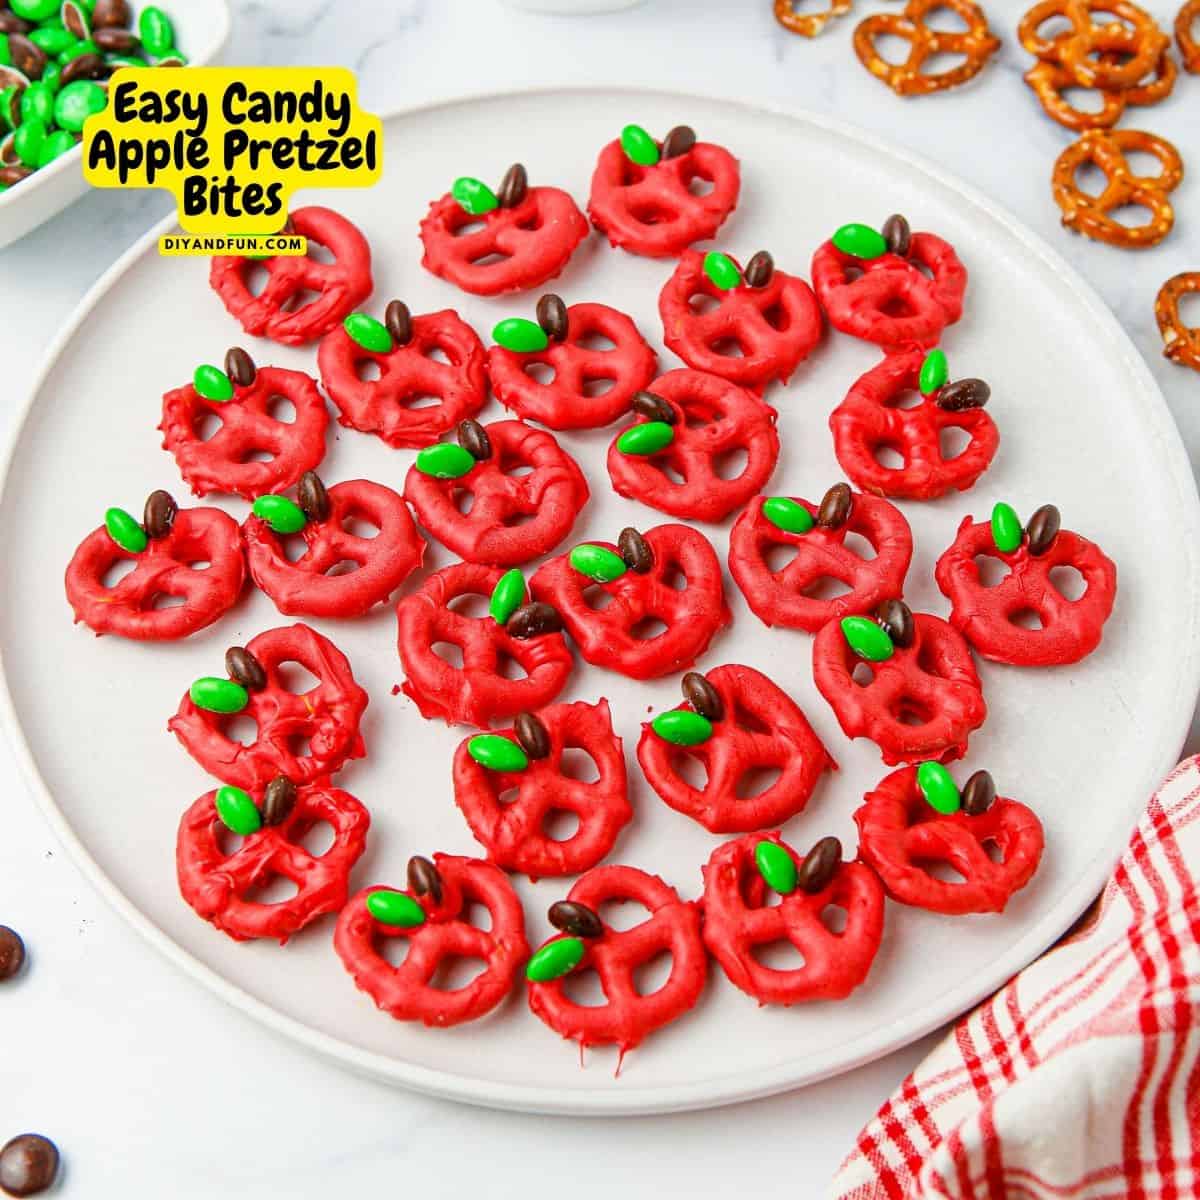 Super Easy Candy Apple Pretzel Bites, a delicious snack or dessert recipe idea for back to school, lunch, or any time!